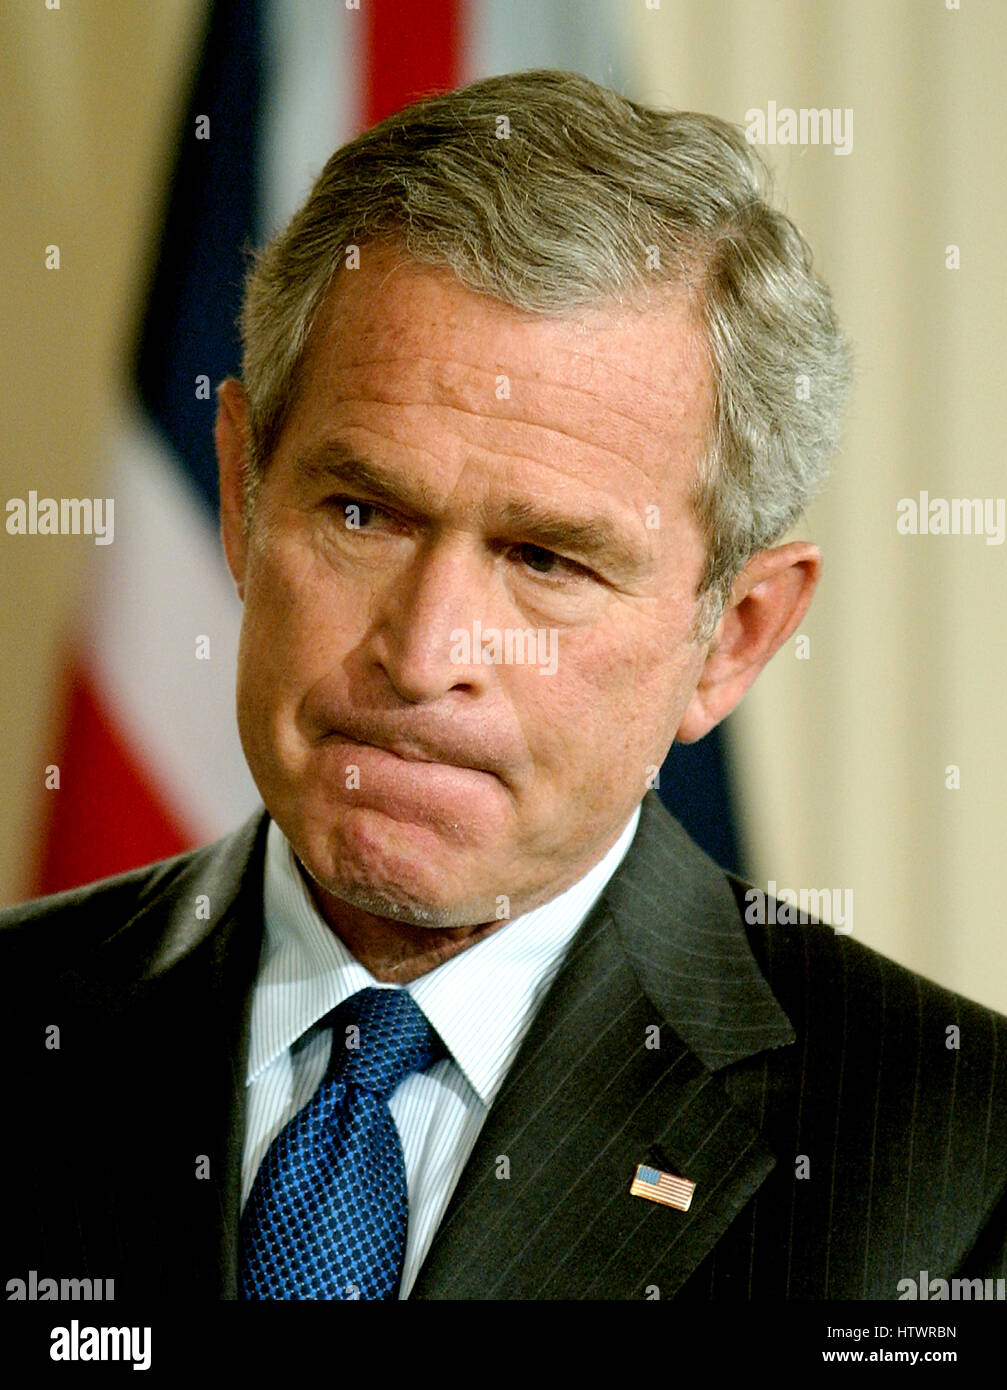 Washington, D.C - July 28, 2006 -- United States President George W Bush and Prime Minister Tony Blair of Great Britain hold a joint press conference in the East Room in the White House on July 28, 2006 They discussed ideas to broker a cease-fire between Stock Photo